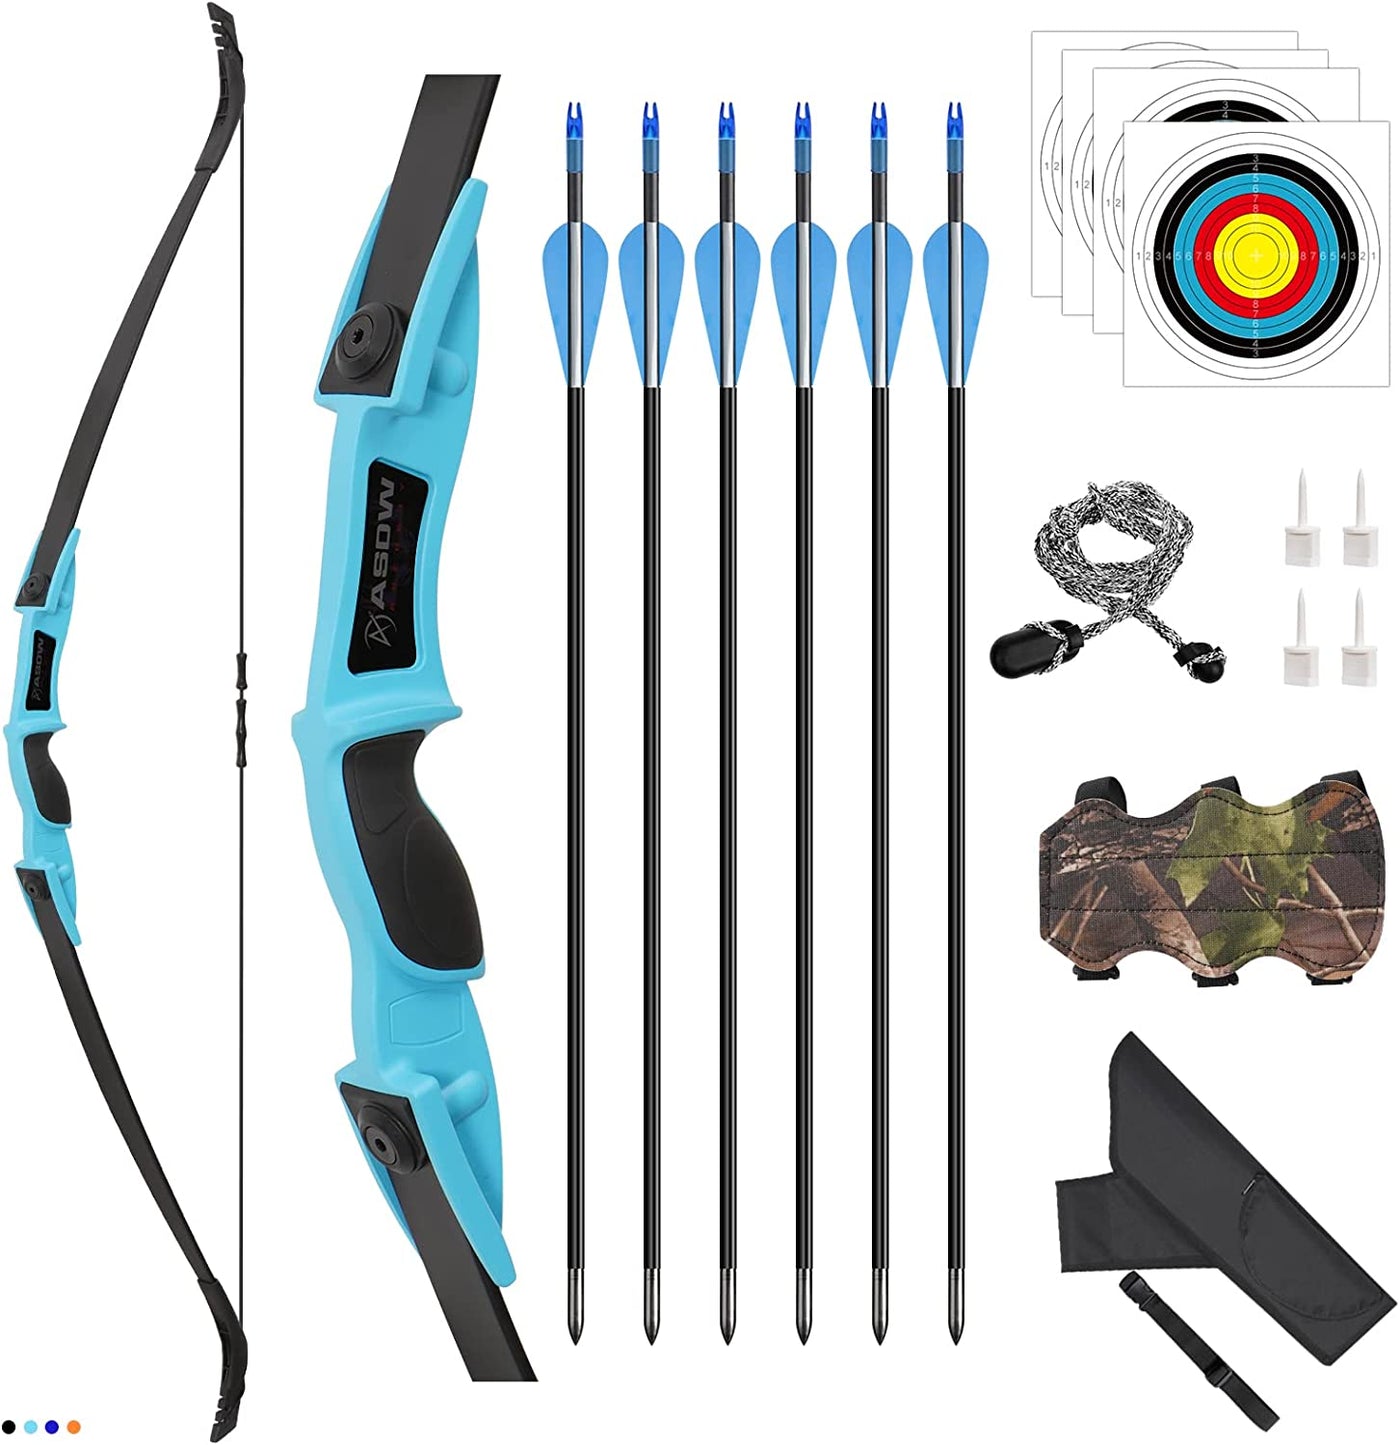 F117 54" Cyan Youth Bow Set Takedown Bow Beginner Bow&Arrow 25-35 Lbs, For 12+